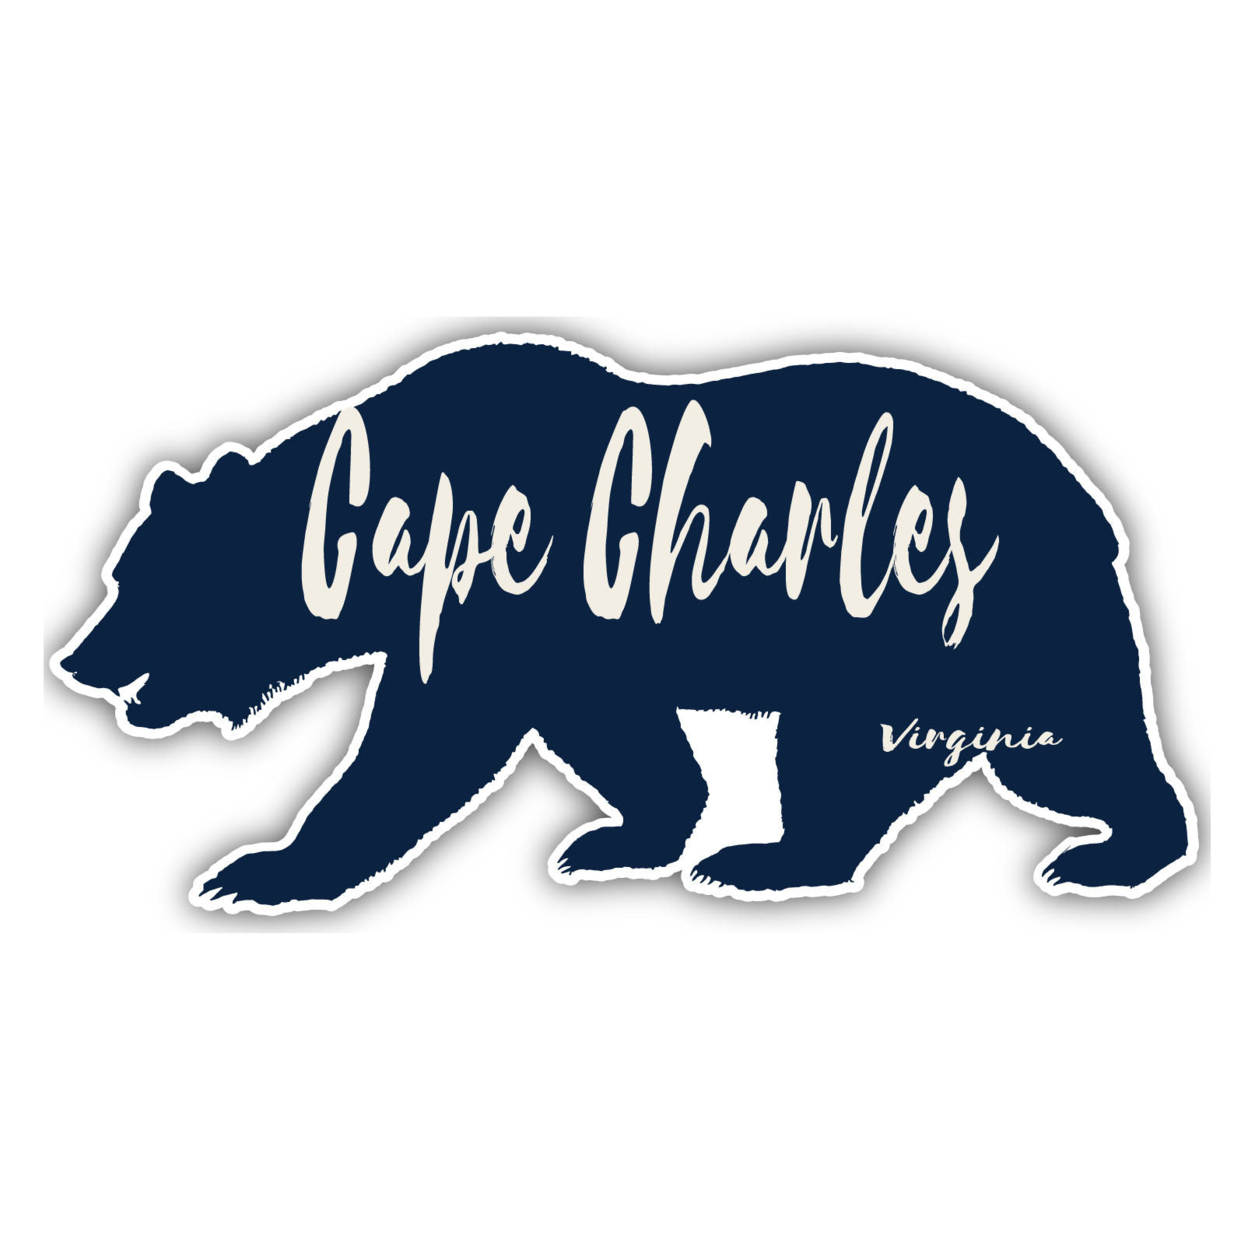 Cape Charles Virginia Souvenir Decorative Stickers (Choose Theme And Size) - 4-Pack, 12-Inch, Camp Life